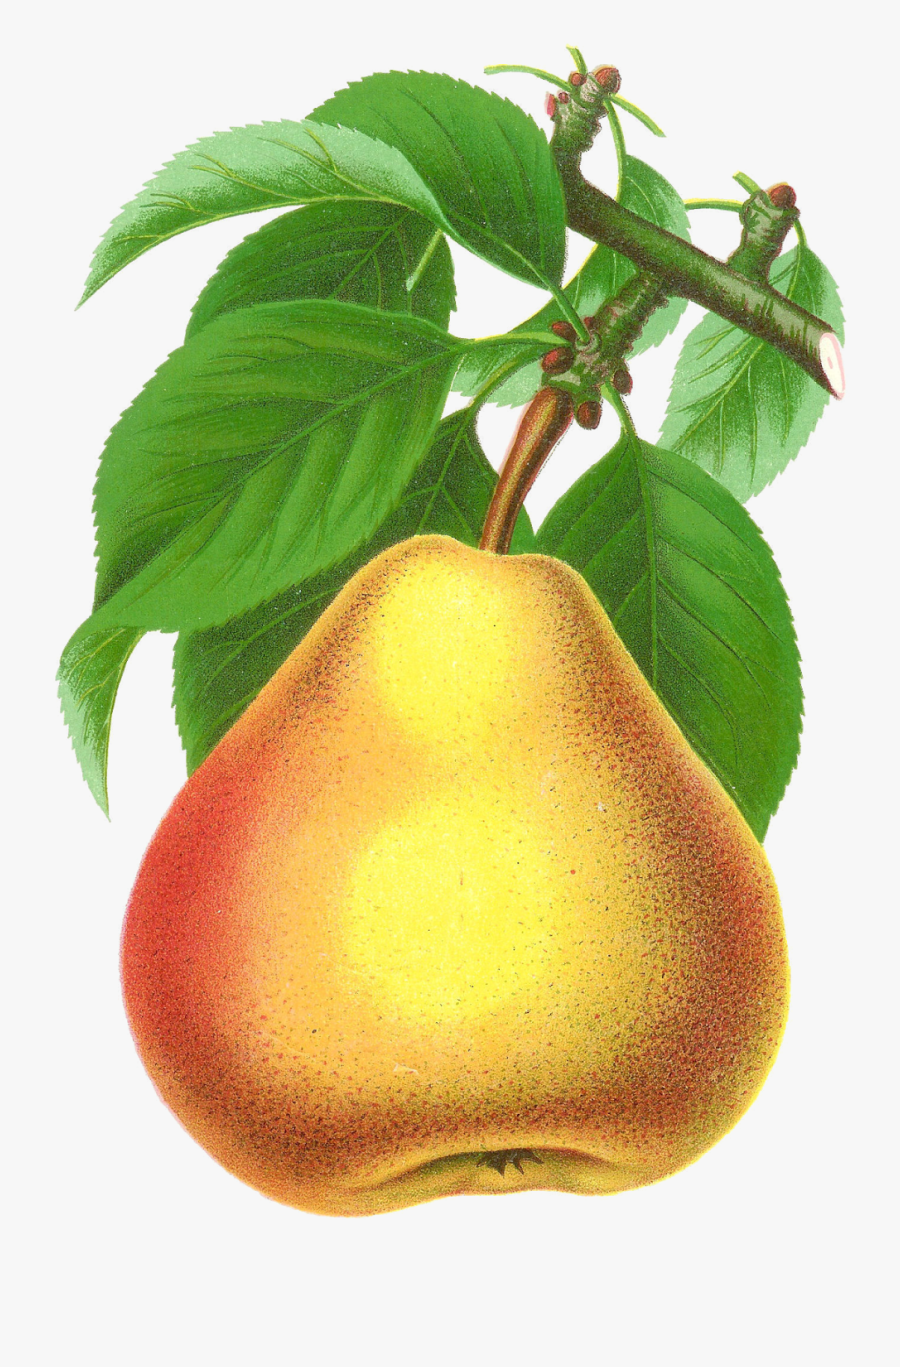 Stock Pear Image - Pear Transparent Pear Free Png, Transparent Clipart